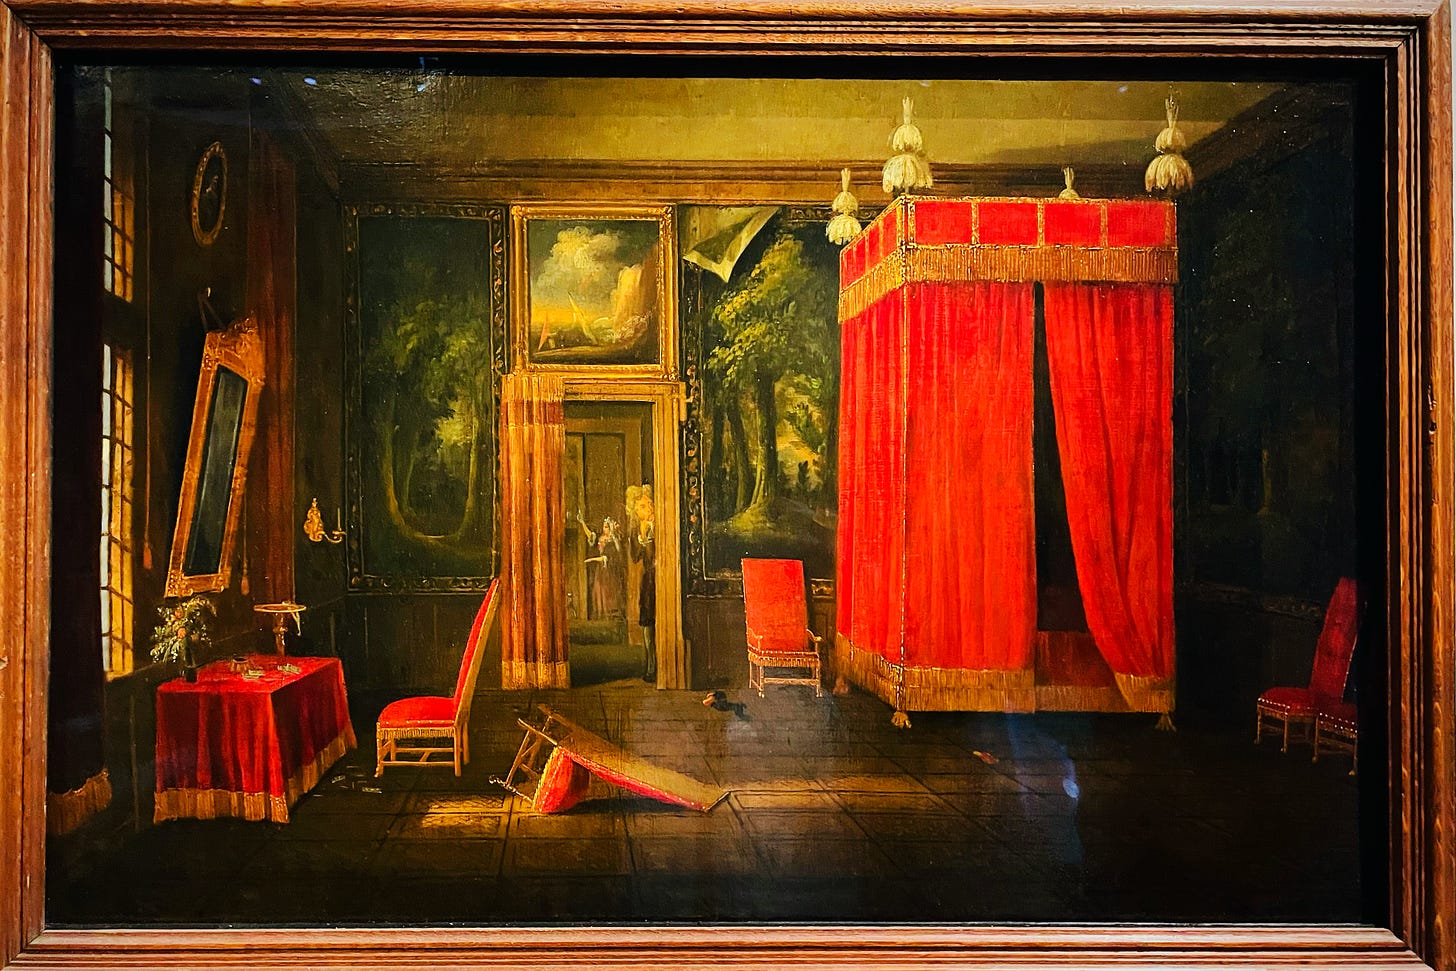 Scene from a bedchamber depicting a room with a curtained bed a knocked over chair and someone peeking in through the open door